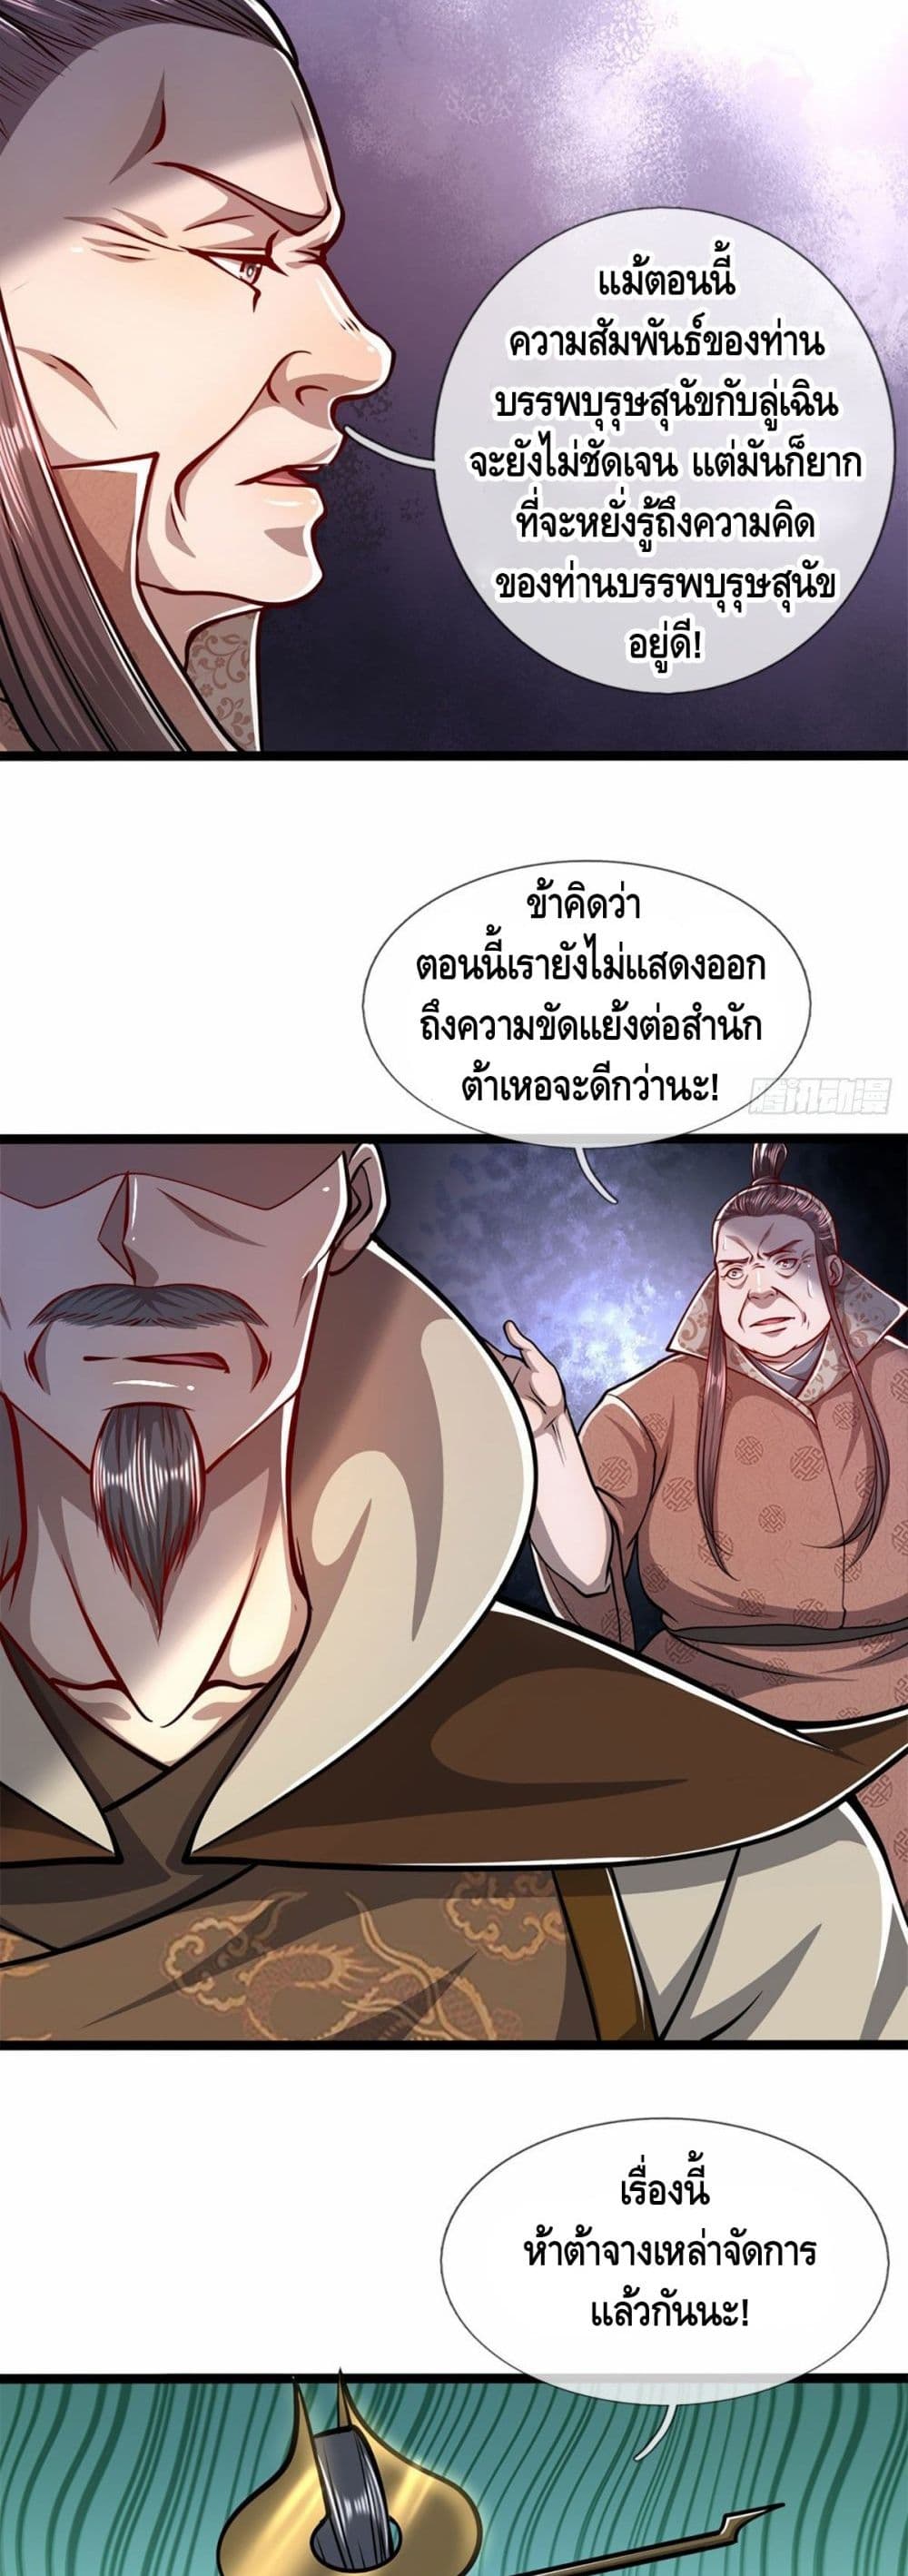 Disciples All Over the World à¸à¸­à¸à¸à¸µà¹ 36 (17)